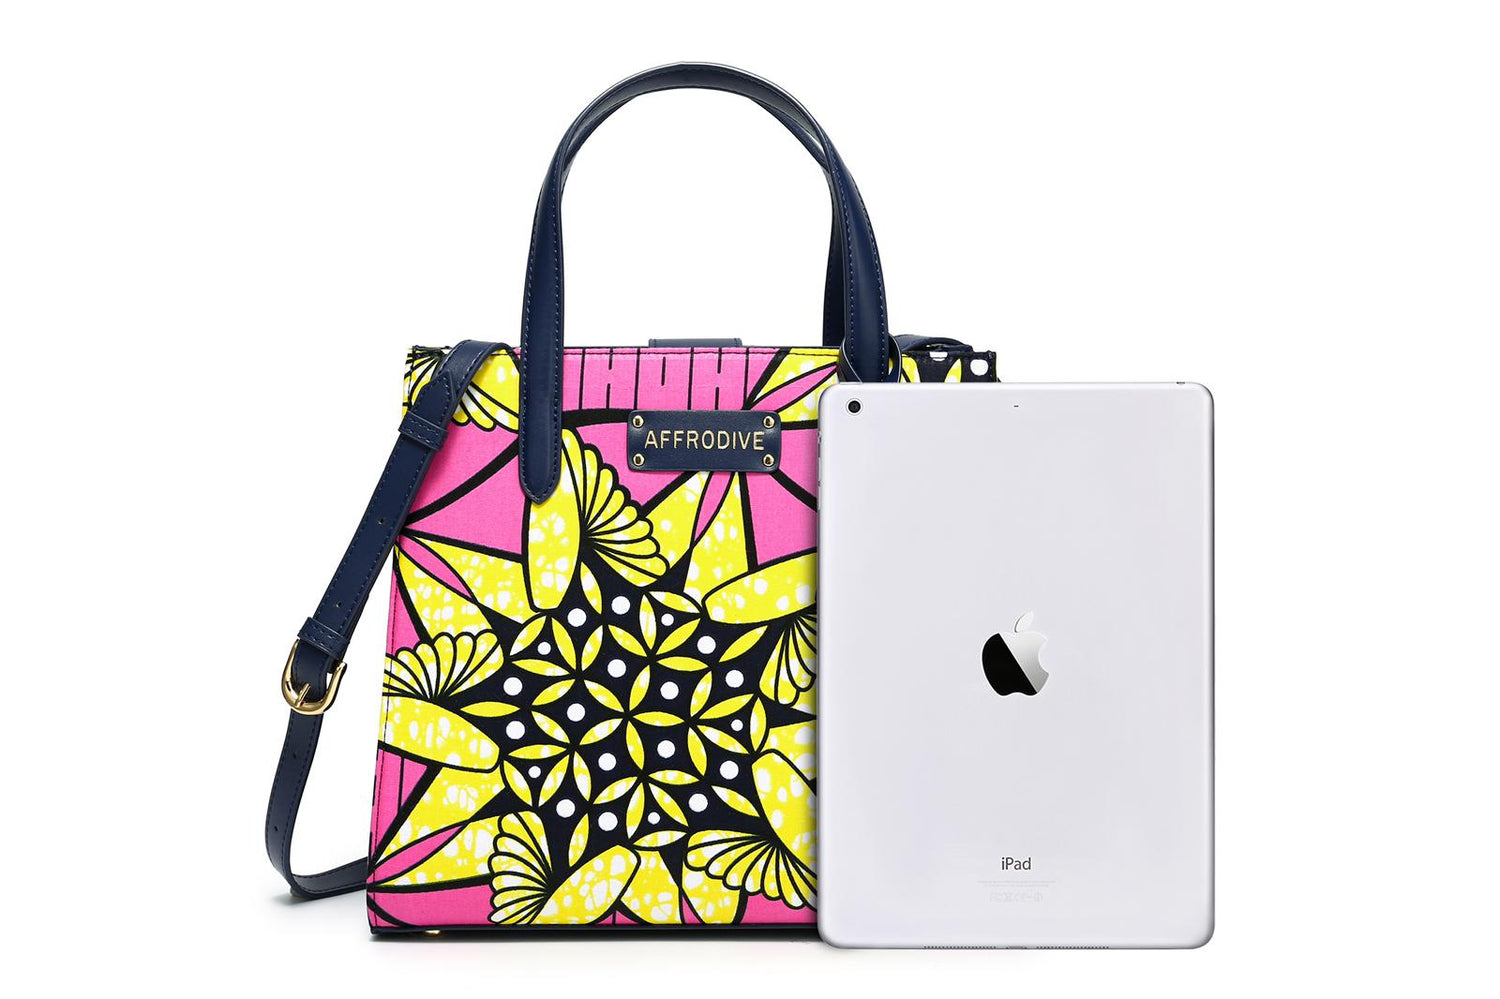 Pink,Gold, Yellow,Black and White Coloured African Ankara Print And Leather Handbag, Blue-Black Leather Handle, zipper, Spacious Easy to Handle African Print Handbag